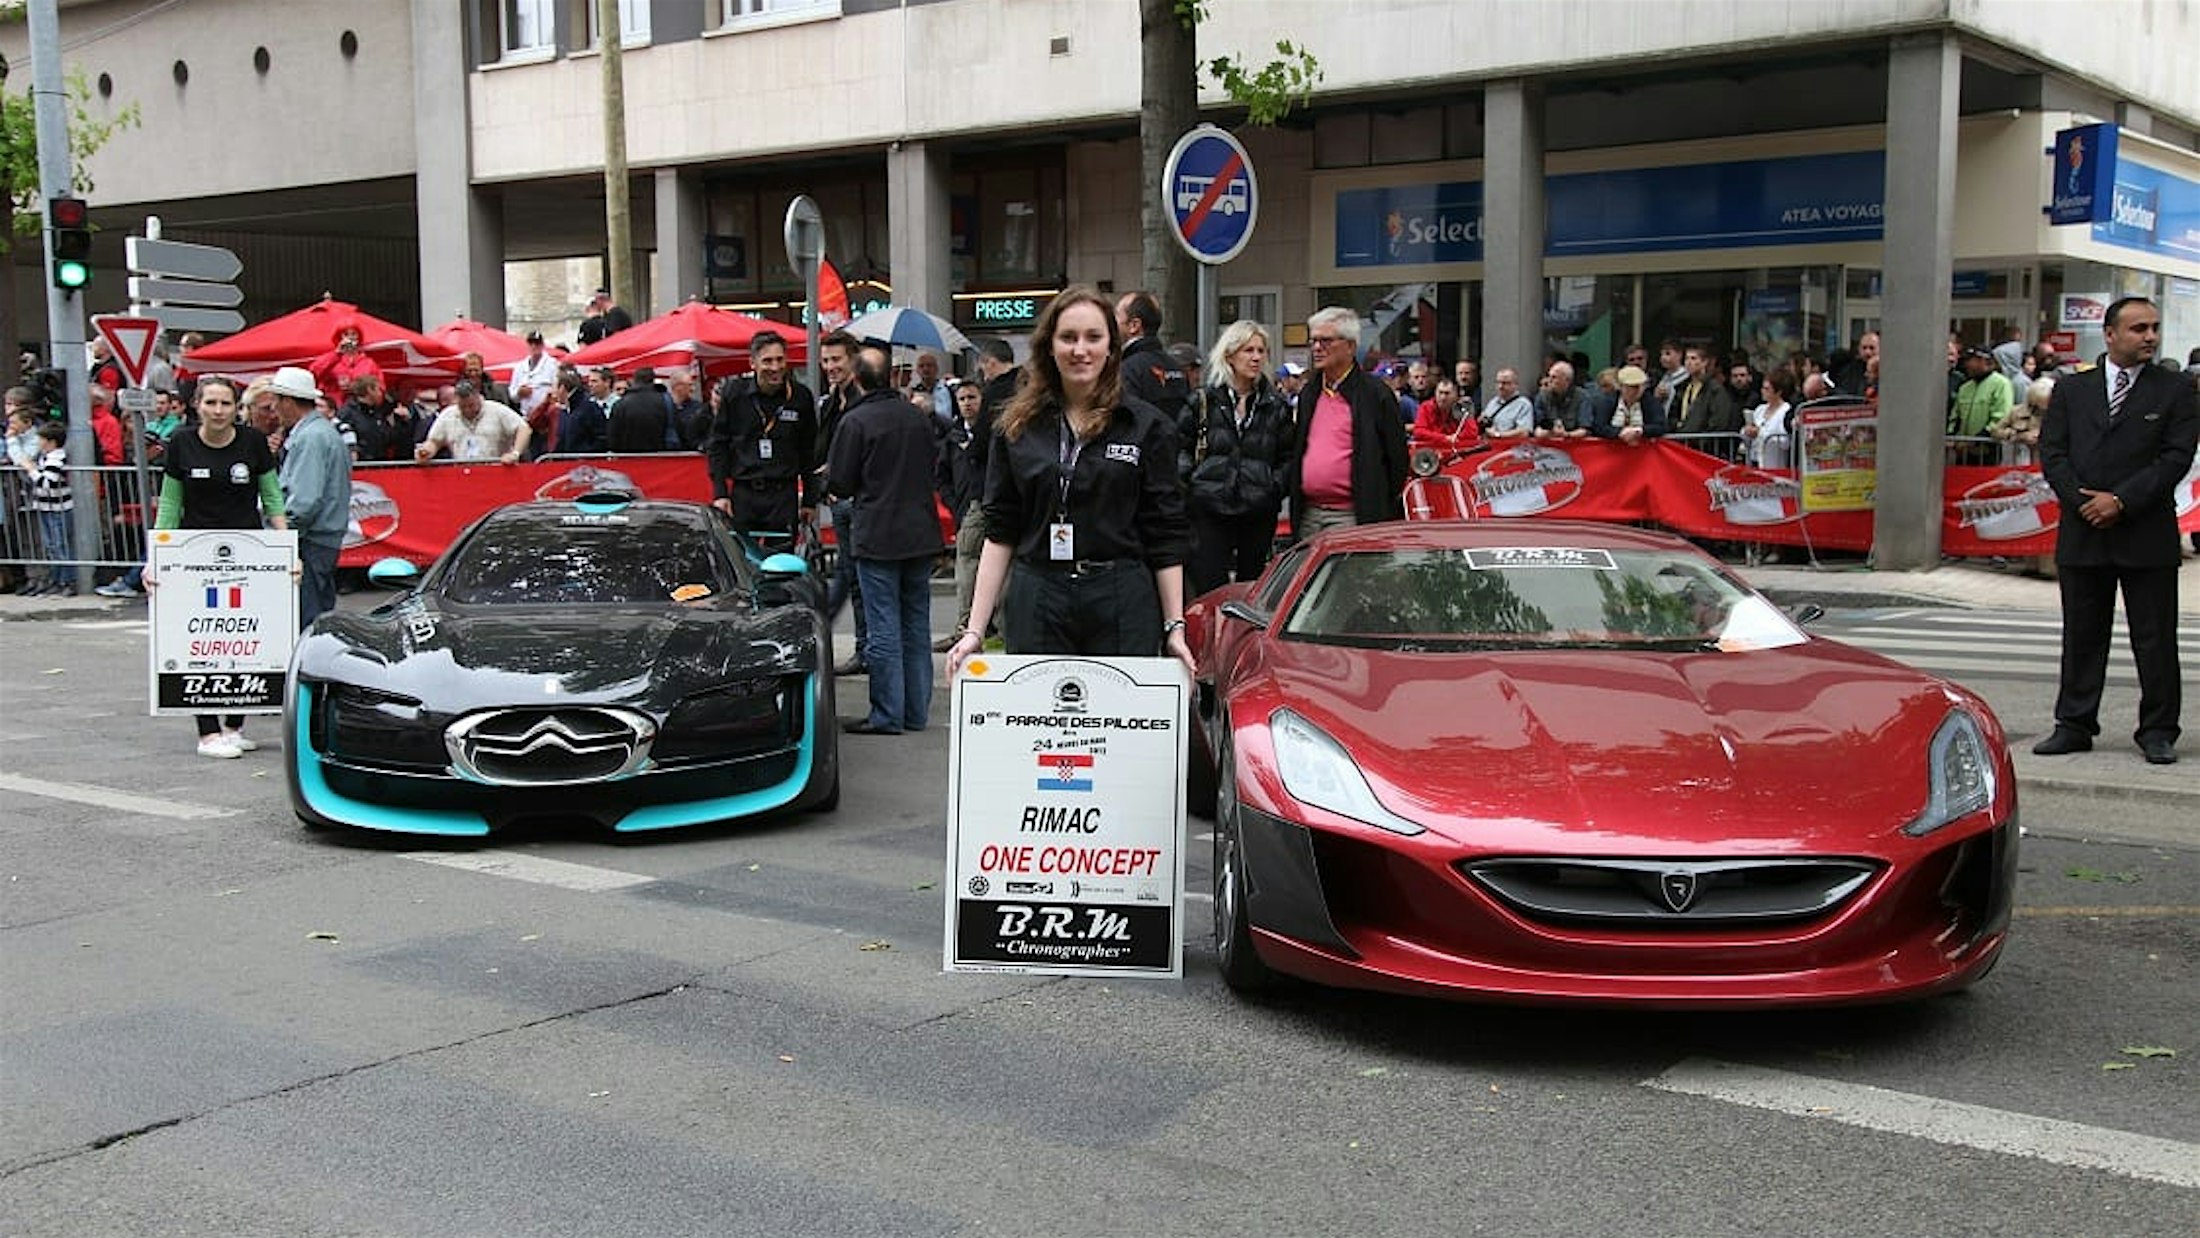 The Concept_One – Winner at Grand Parade of Pilotes of Le Mans 24 Hours